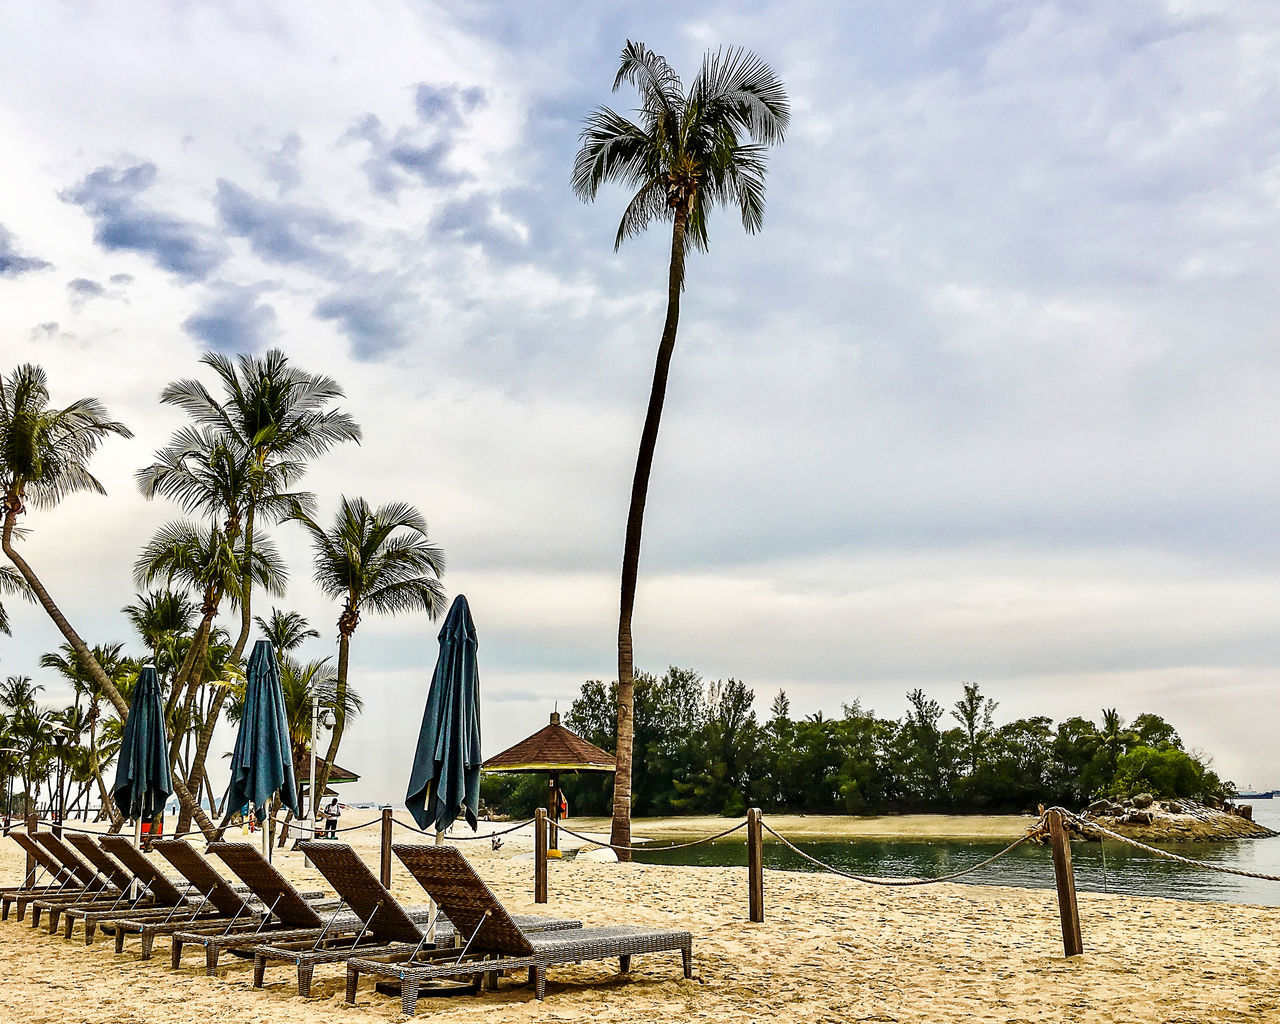 plant, sky, tropical climate, tree, palm tree, cloud - sky, water, nature, growth, beach, beauty in nature, land, sea, day, scenics - nature, tranquility, tranquil scene, coconut palm tree, tree trunk, outdoors, no people, tropical tree